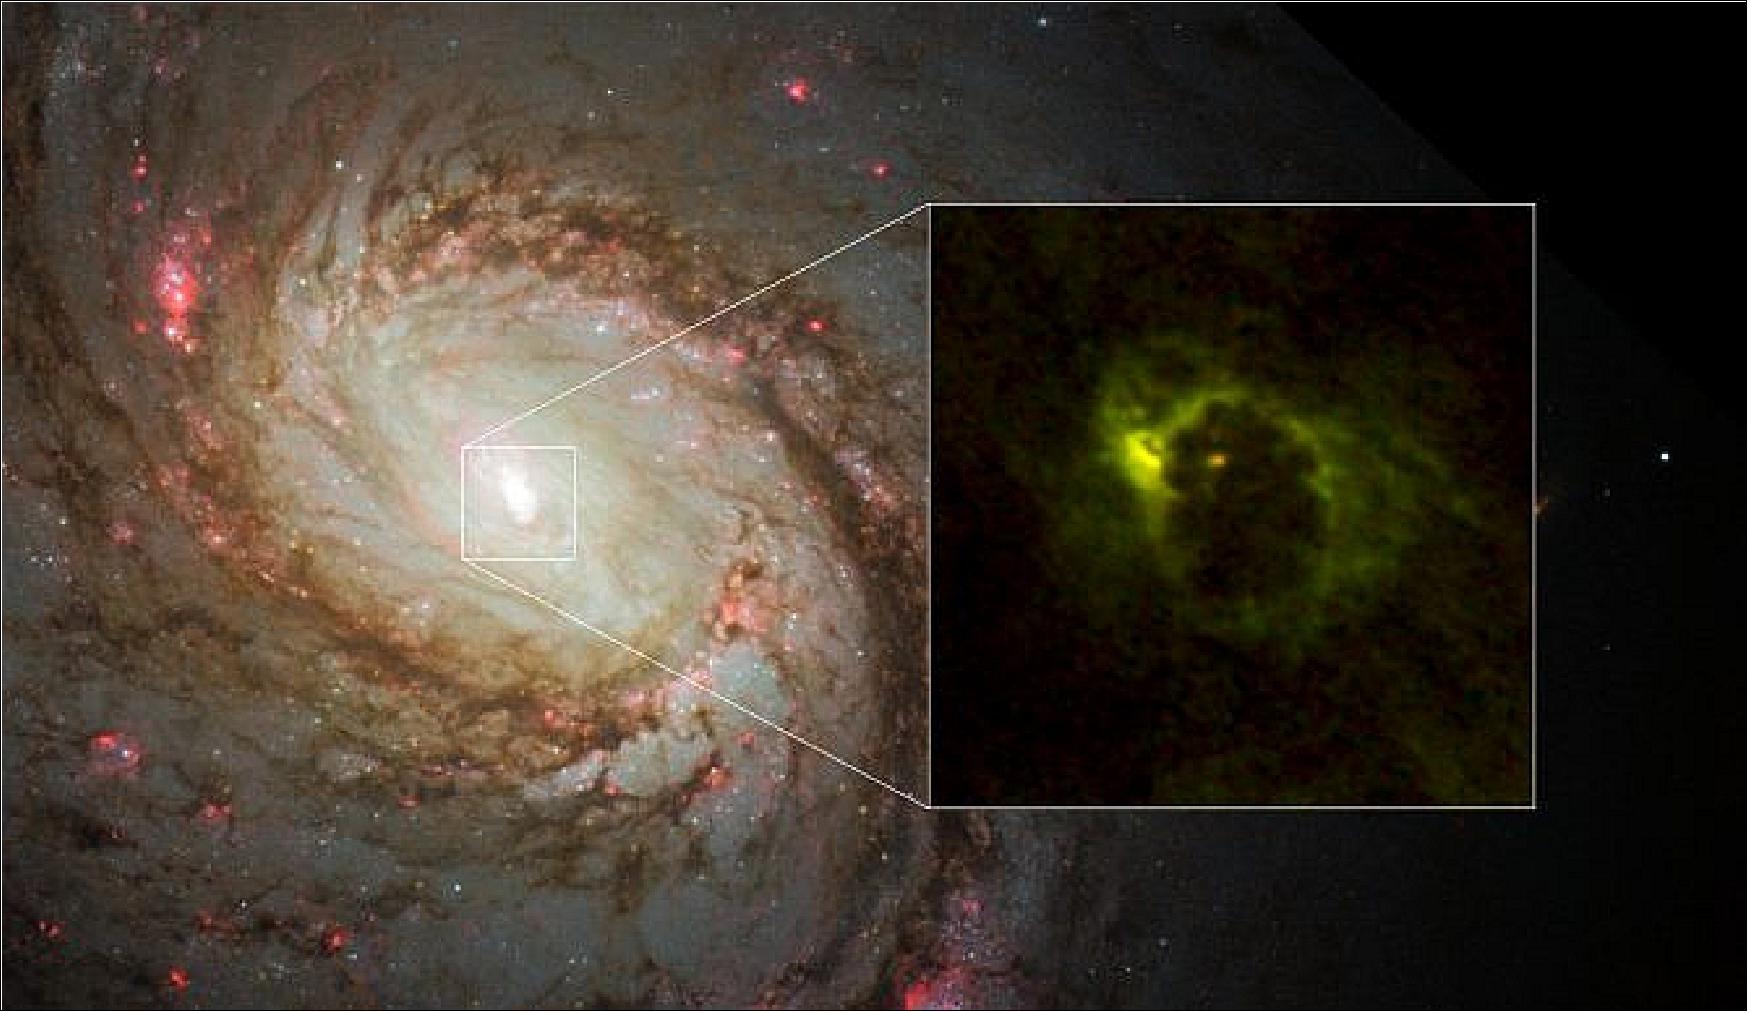 Figure 26: The central region of the spiral galaxy M77. The NASA/ESA Hubble Space Telescope imaged the distribution of stars. ALMA revealed the distribution of gas in the very center of the galaxy (ALMA image at right). ALMA imaged a horseshoe-like structure with a radius of 700 light-years and a central compact component with a radius of 20 light-years . The latter is the gaseous torus around the AGN (Active Galactic Nucleus). Red indicates emission from formyl ions (HCO+) and green indicates hydrogen cyanide emission (image credit: ALMA (ESO/NAOJ/NRAO), Imanishi et al., NASA/ESA Hubble Space Telescope and A. van der Hoeven)